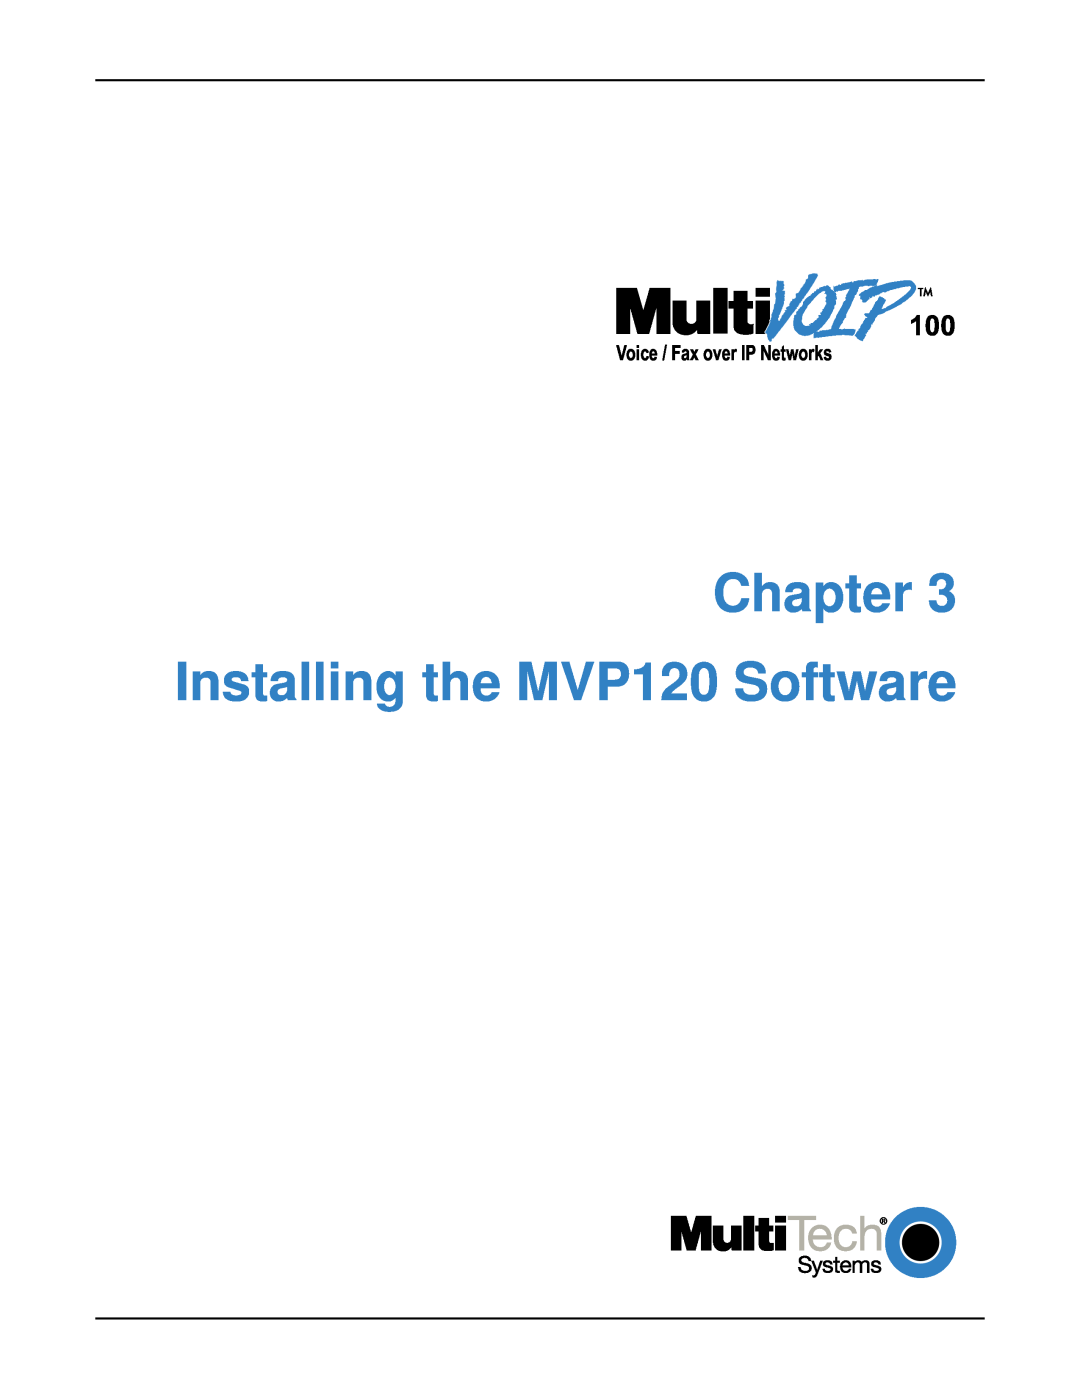 Multi-Tech Systems manual Chapter Installing the MVP120 Software, Voice / Fax over IP Networks 